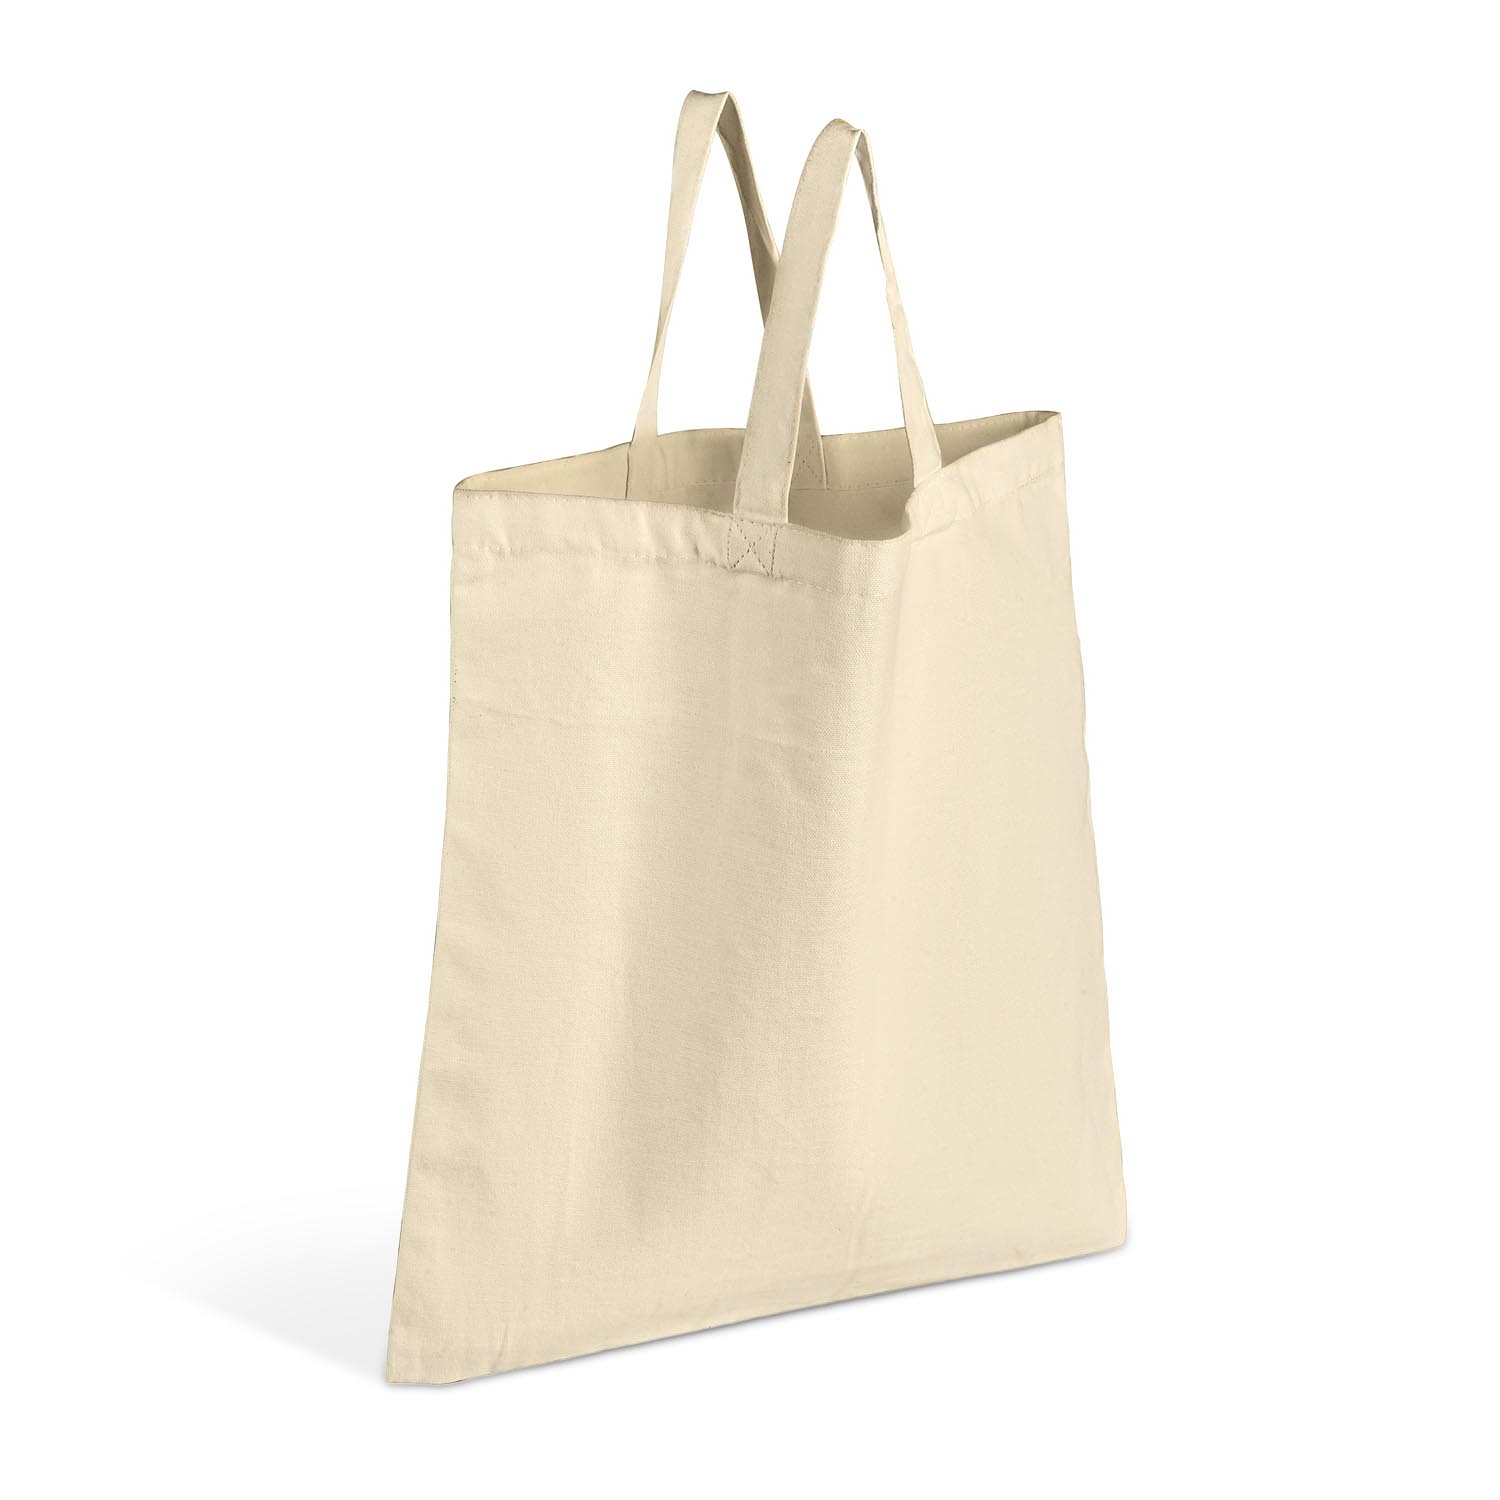 Cloth Bags Manufacturers In India: Check the List of top Manufacturers